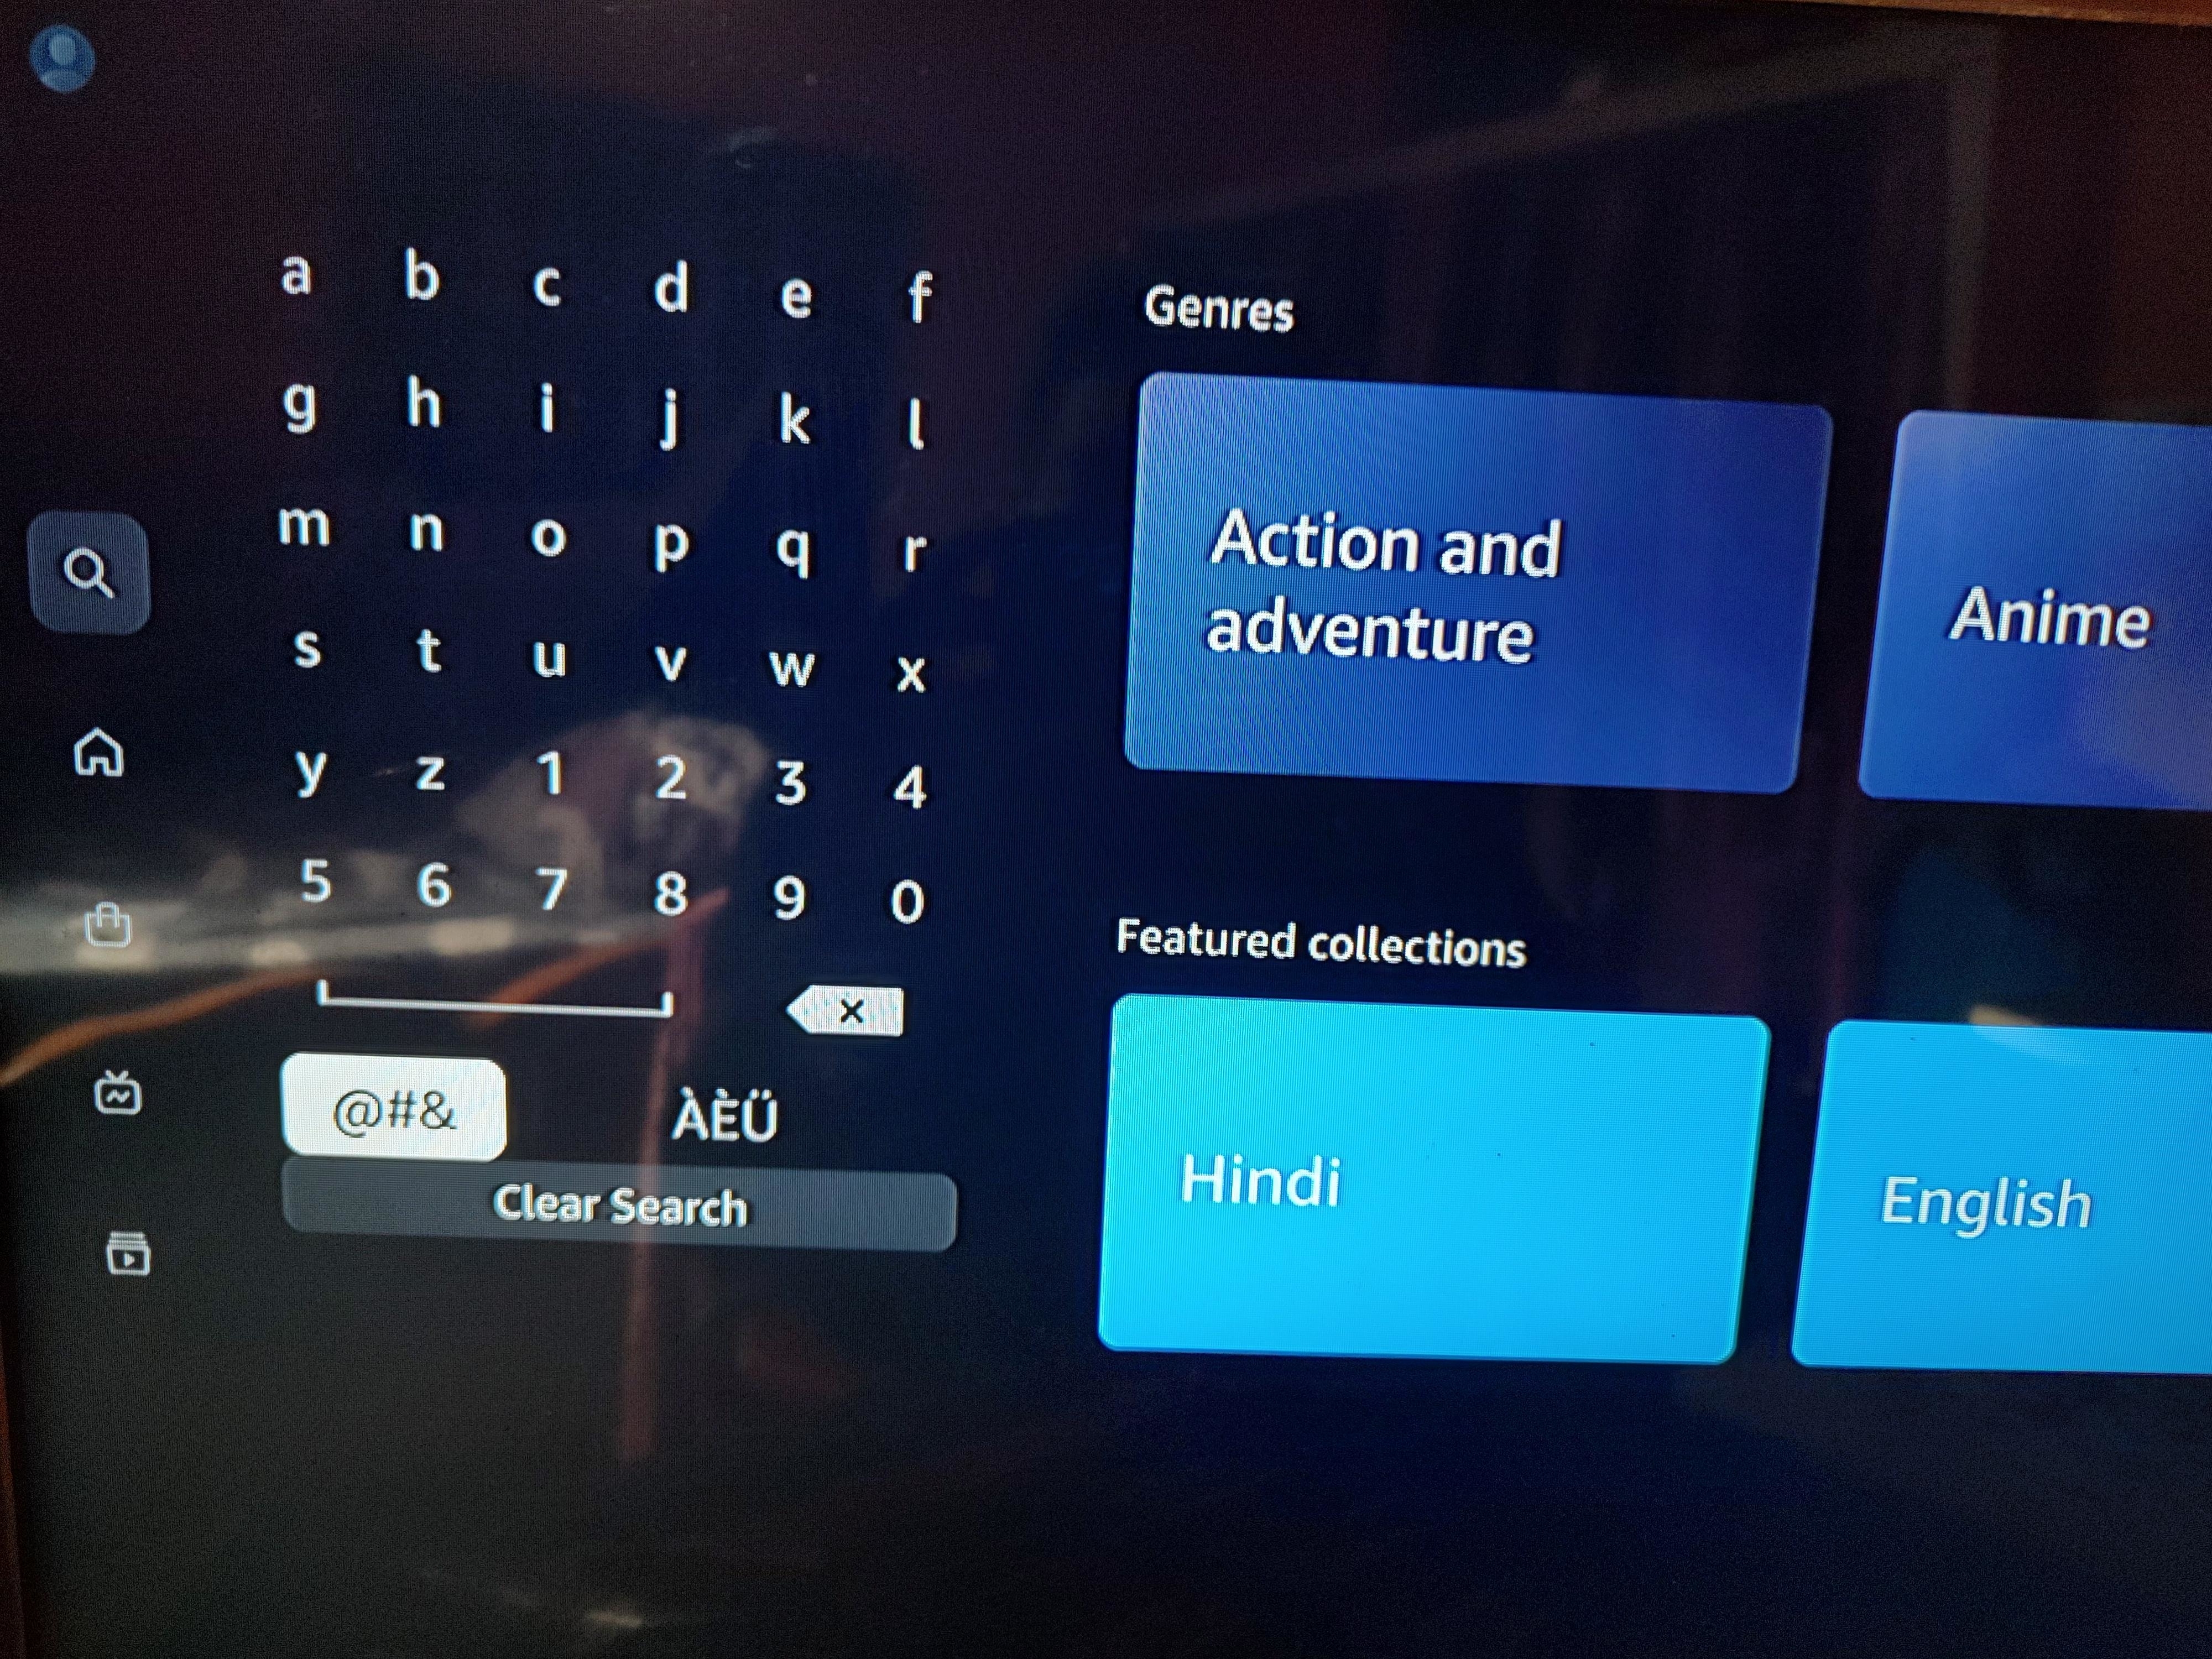 On-screen keyboard displayed with genre options for movies and TV shows on a streaming platform